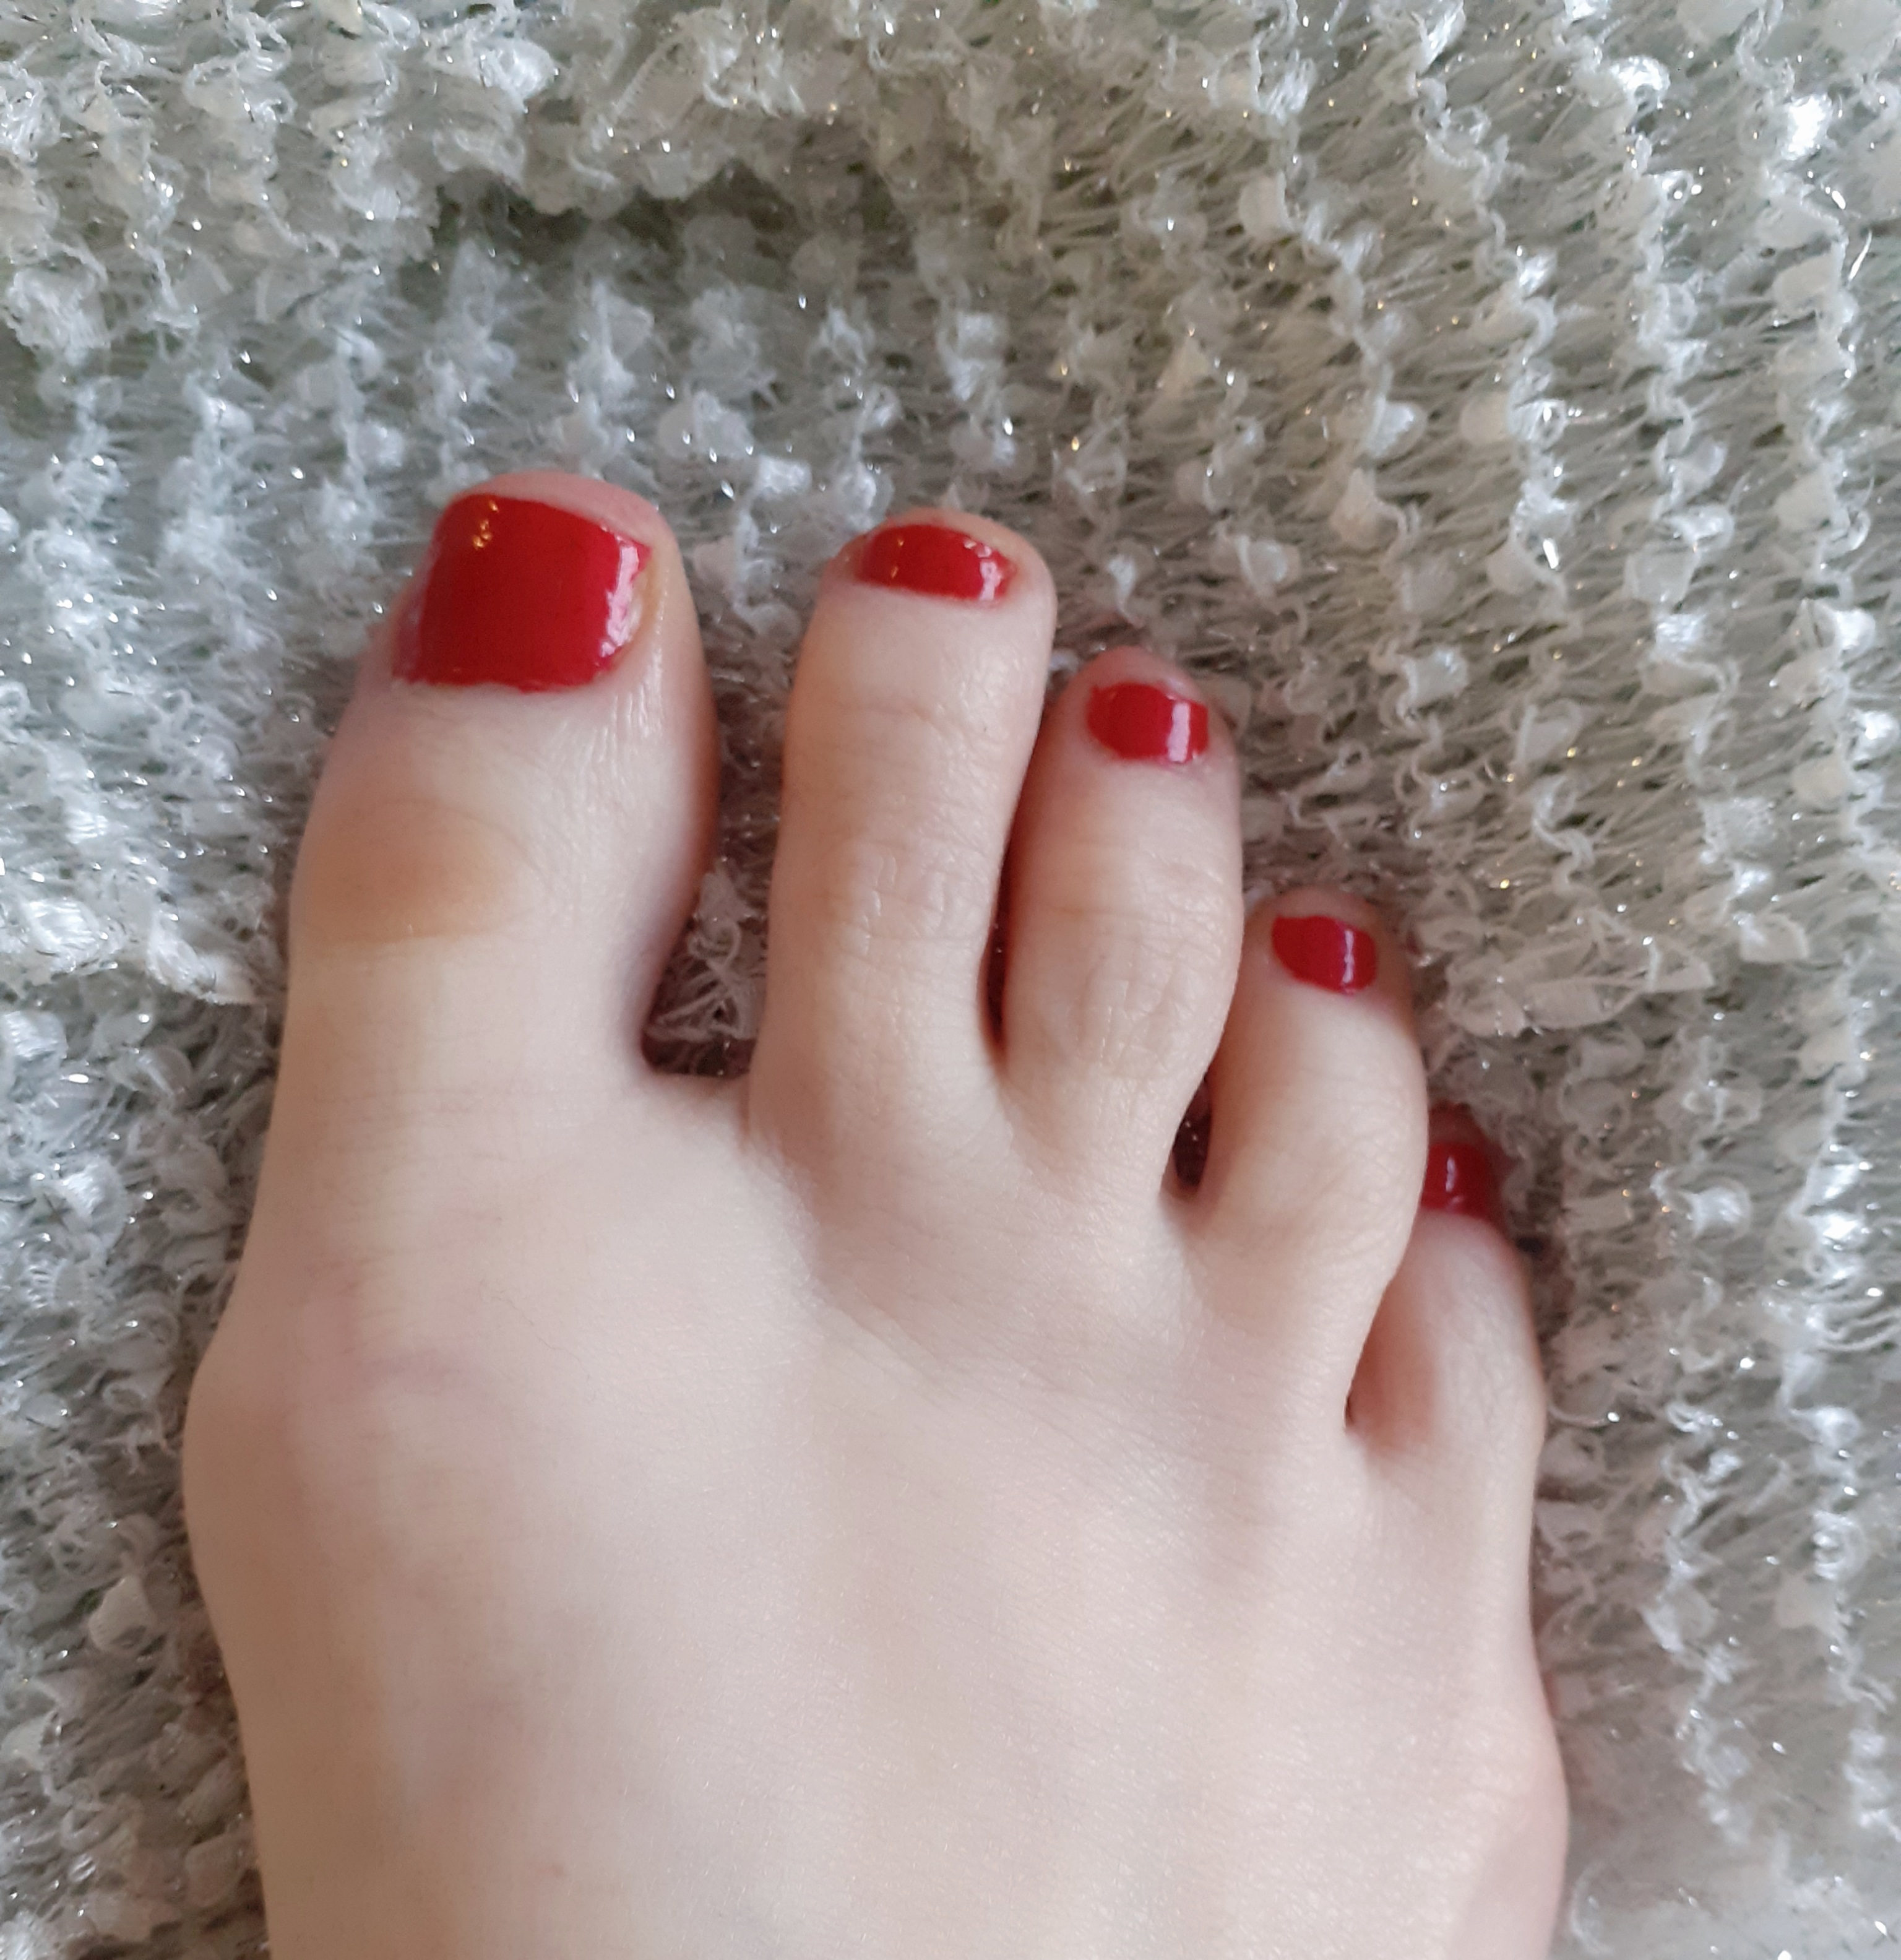 Essie not collection Real Snuggle 749 bed Is Lacquer for Nail red-y The